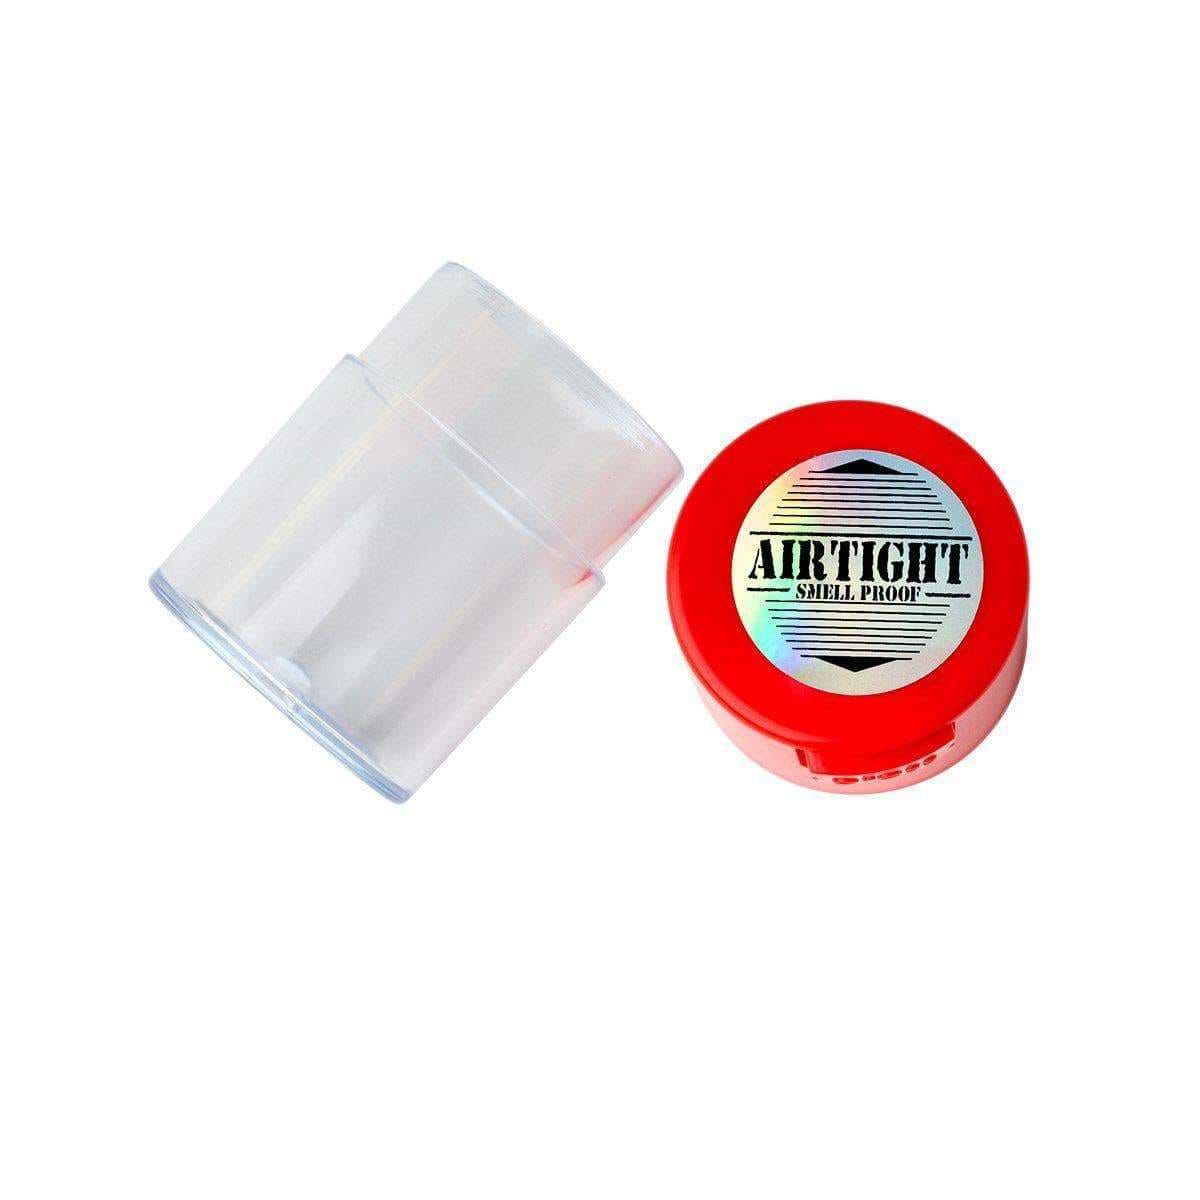 opened airtight Tightvac herb storage clear body vacuum seal keep herbs fresh and moisture-free airtight label on red lid